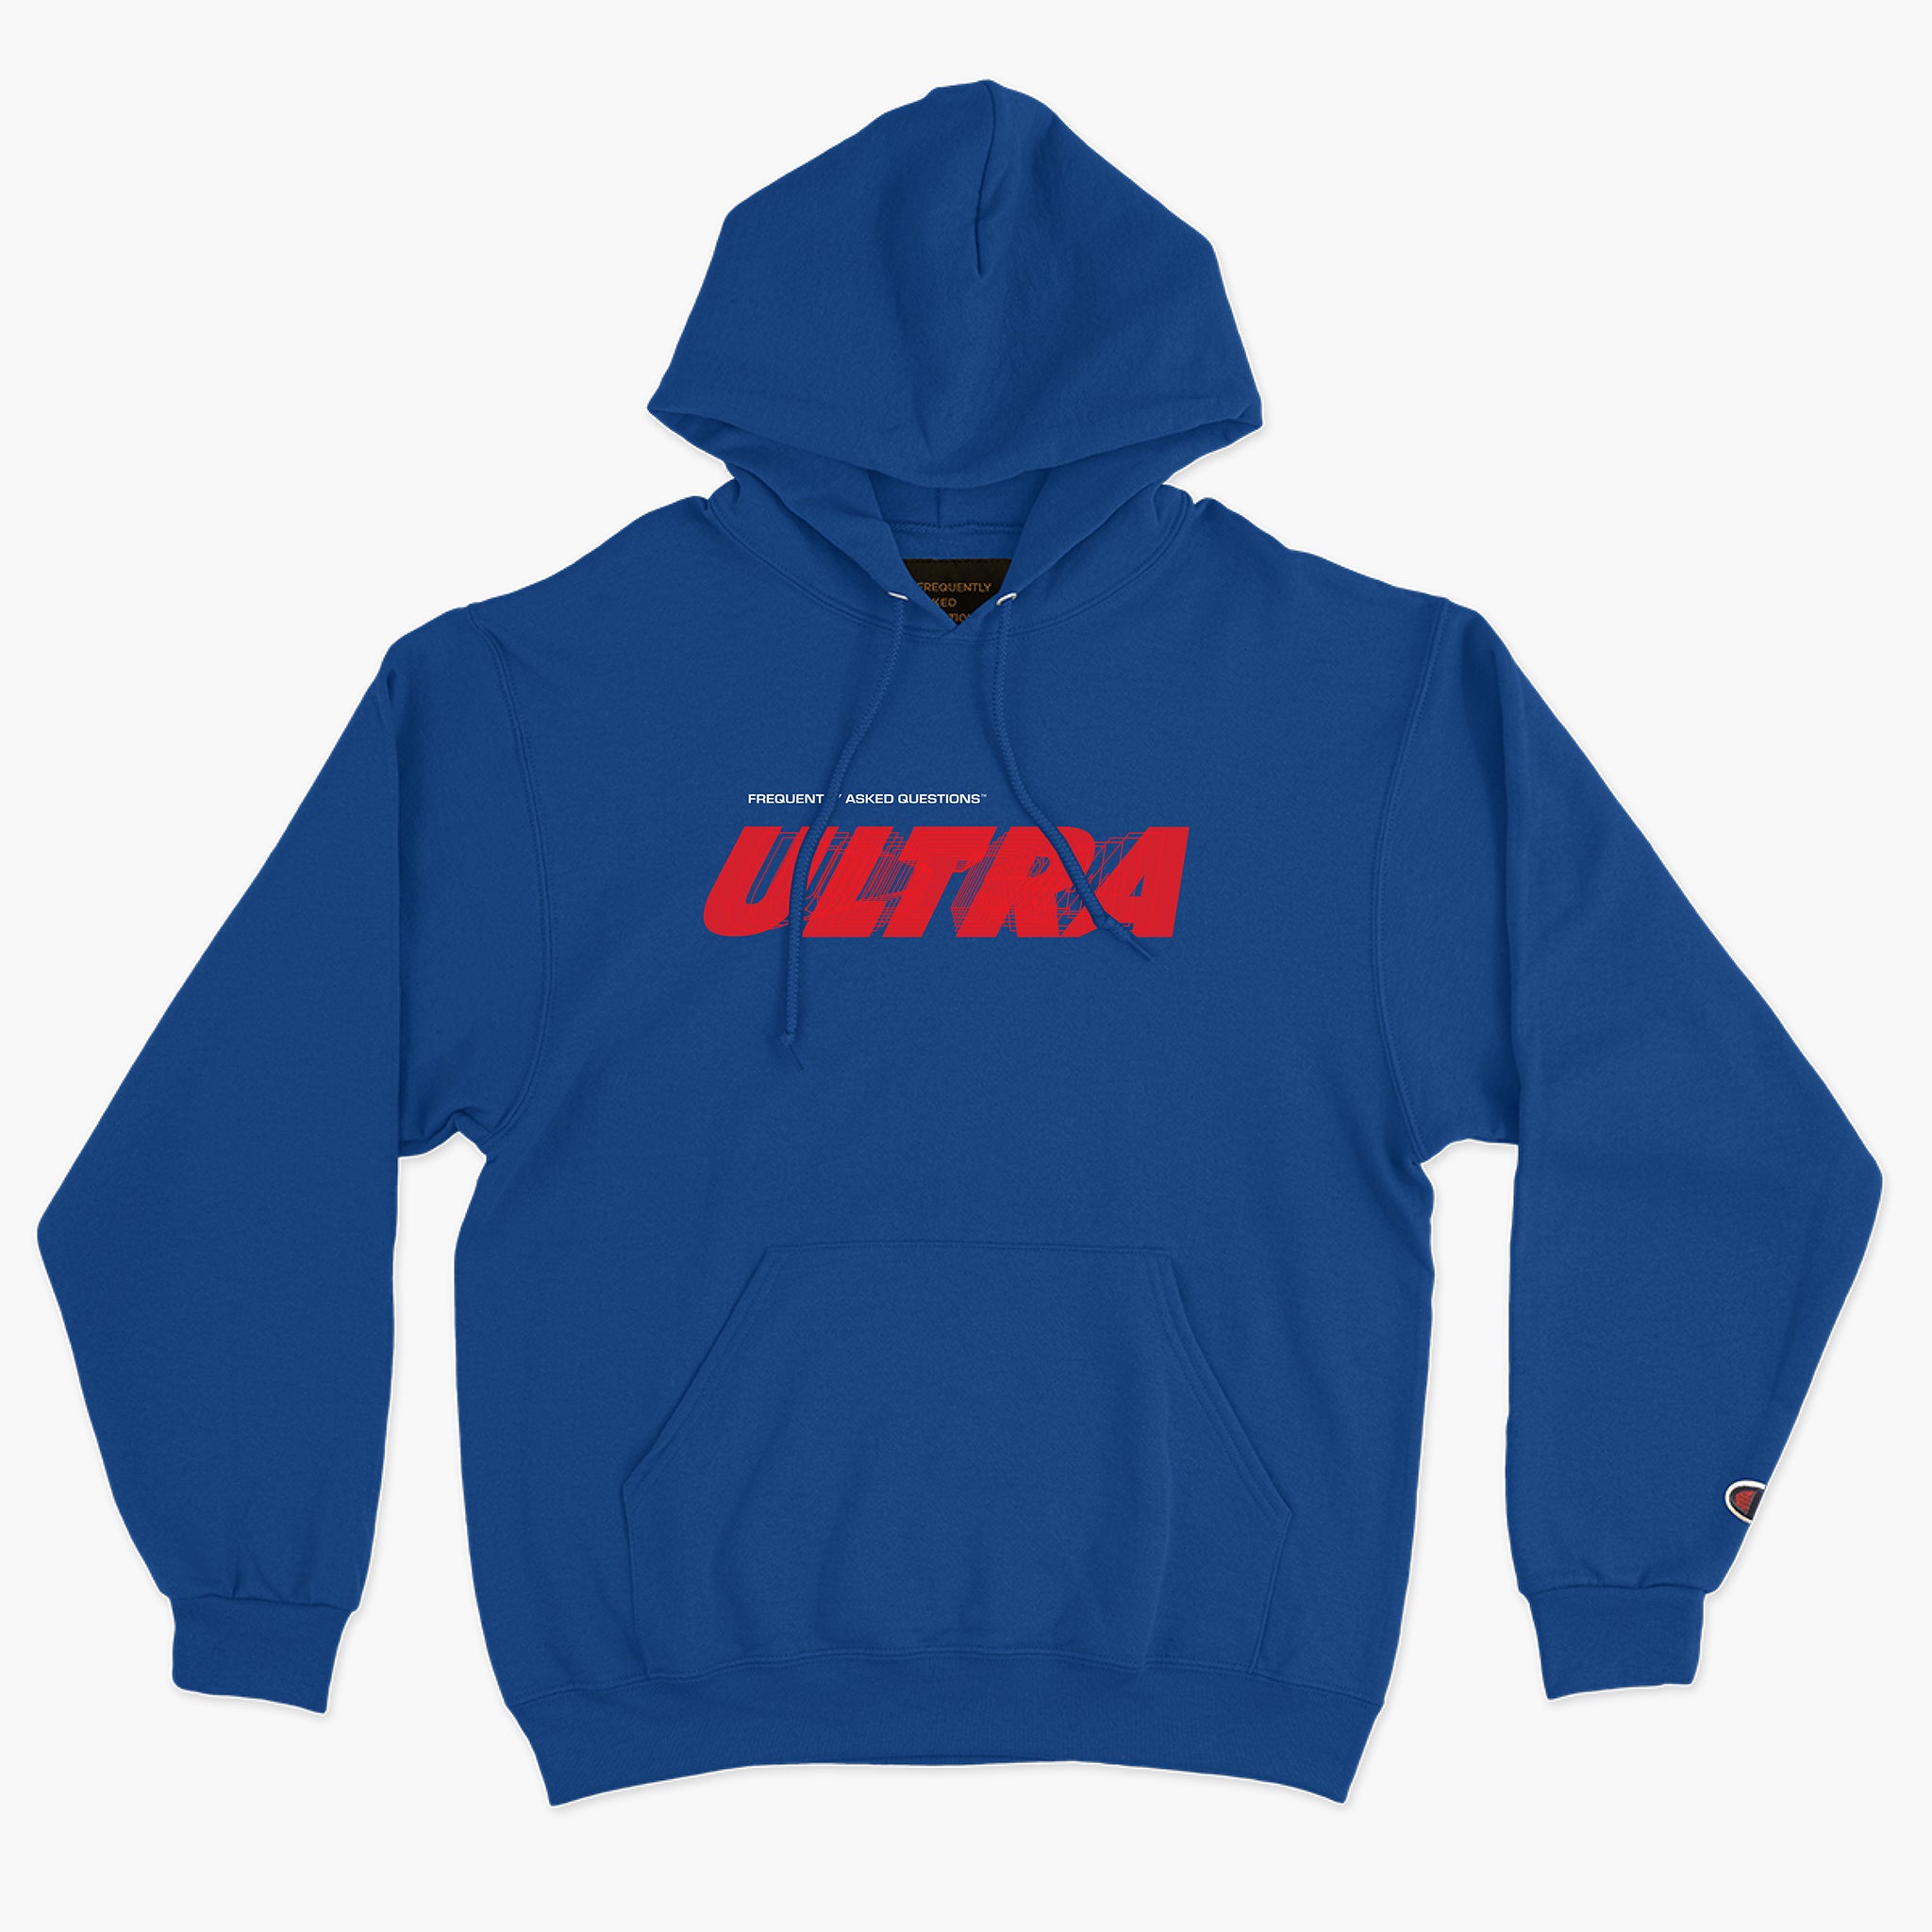 Ultra Hoodie - Frequently Asked Questions